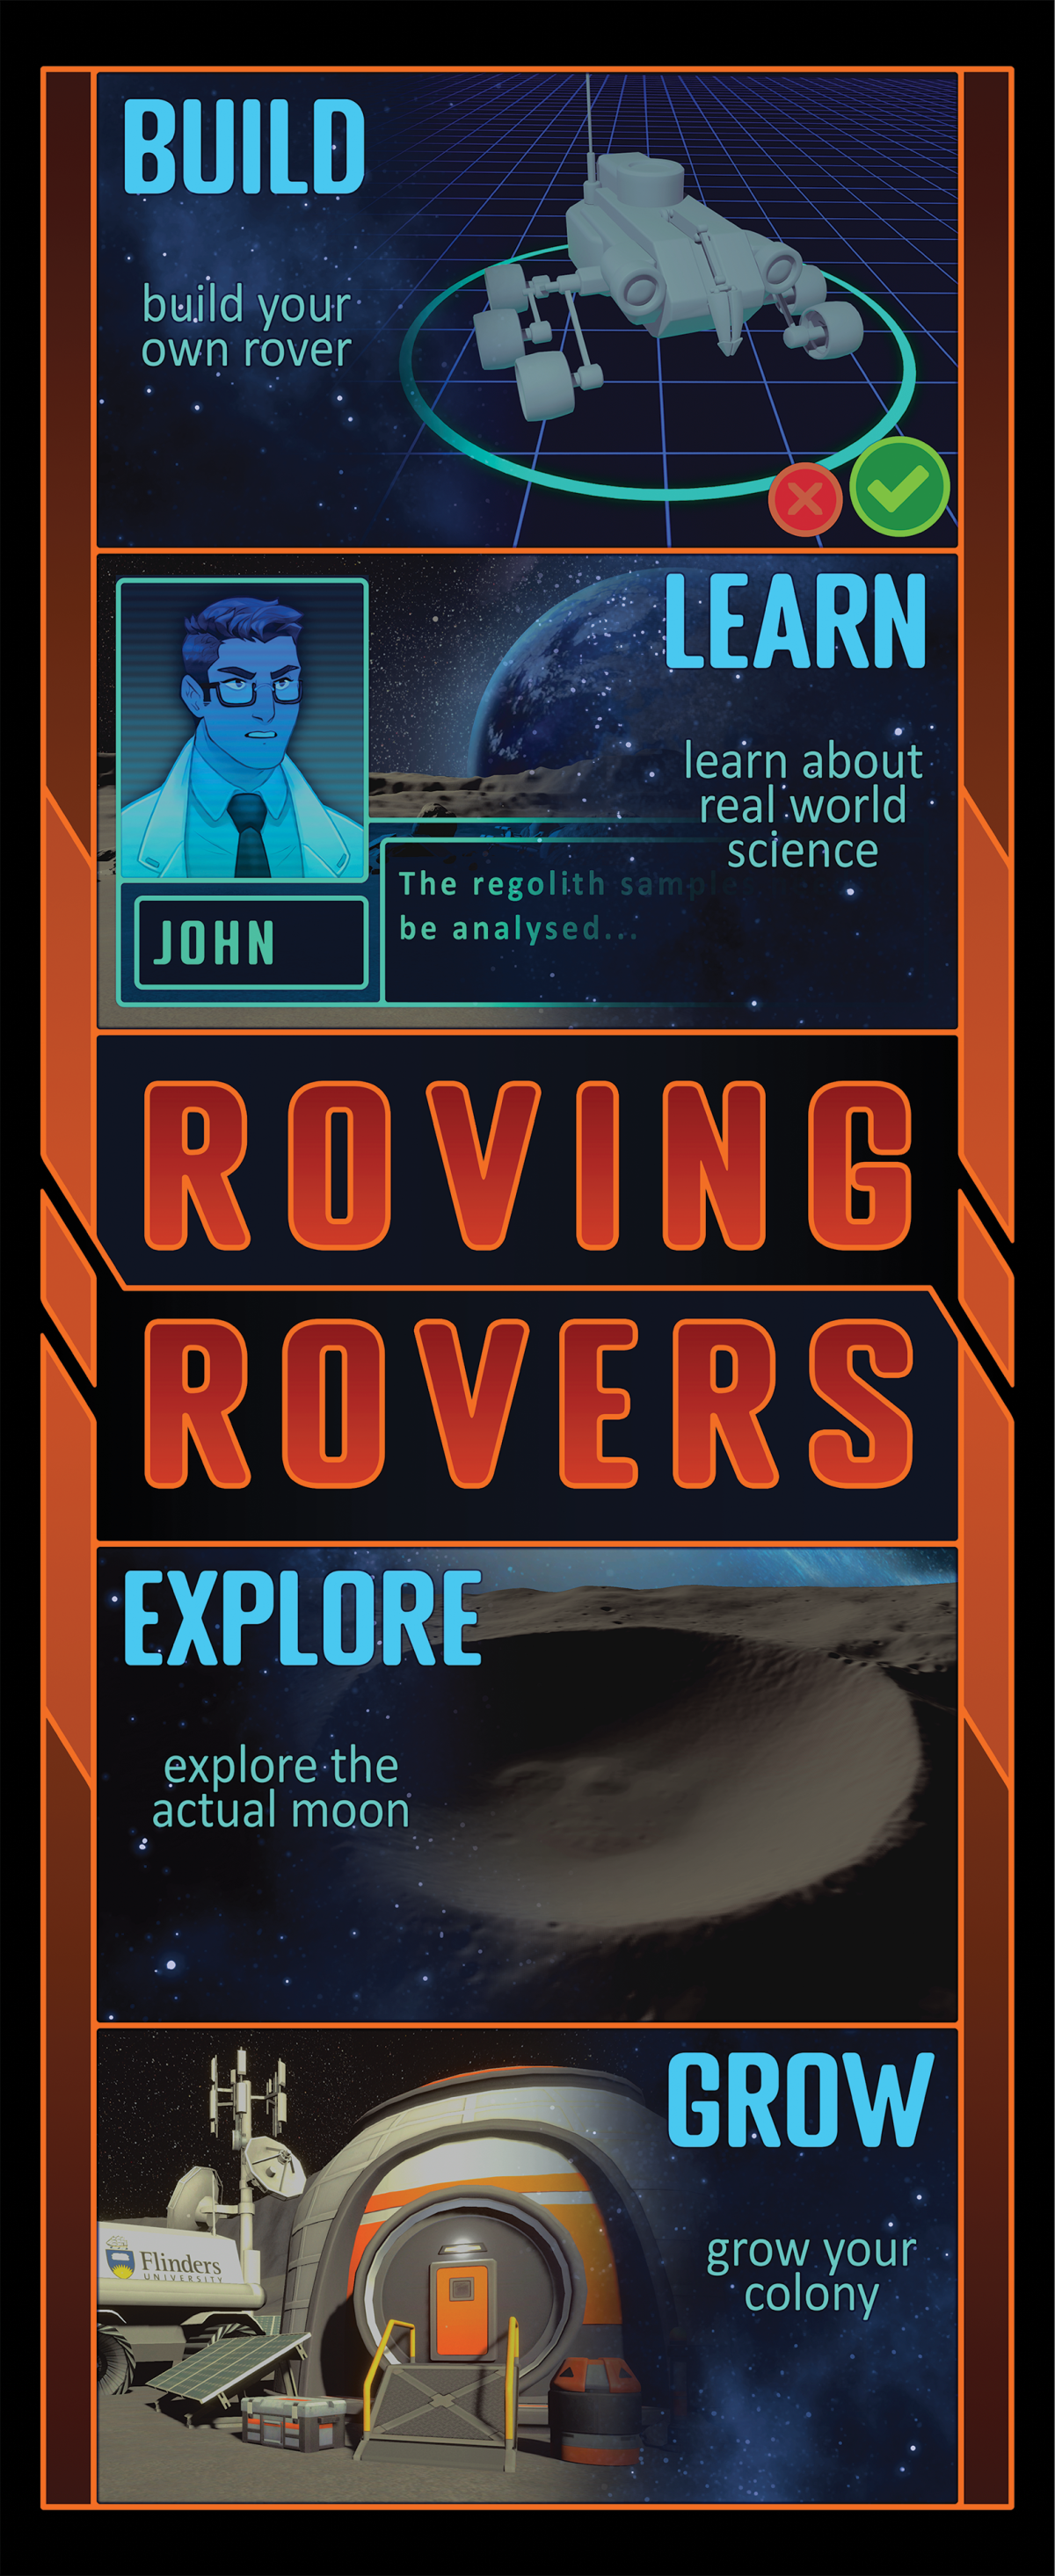 a strip with animated drawings of roving rovers figures including a space vehicle and scientist